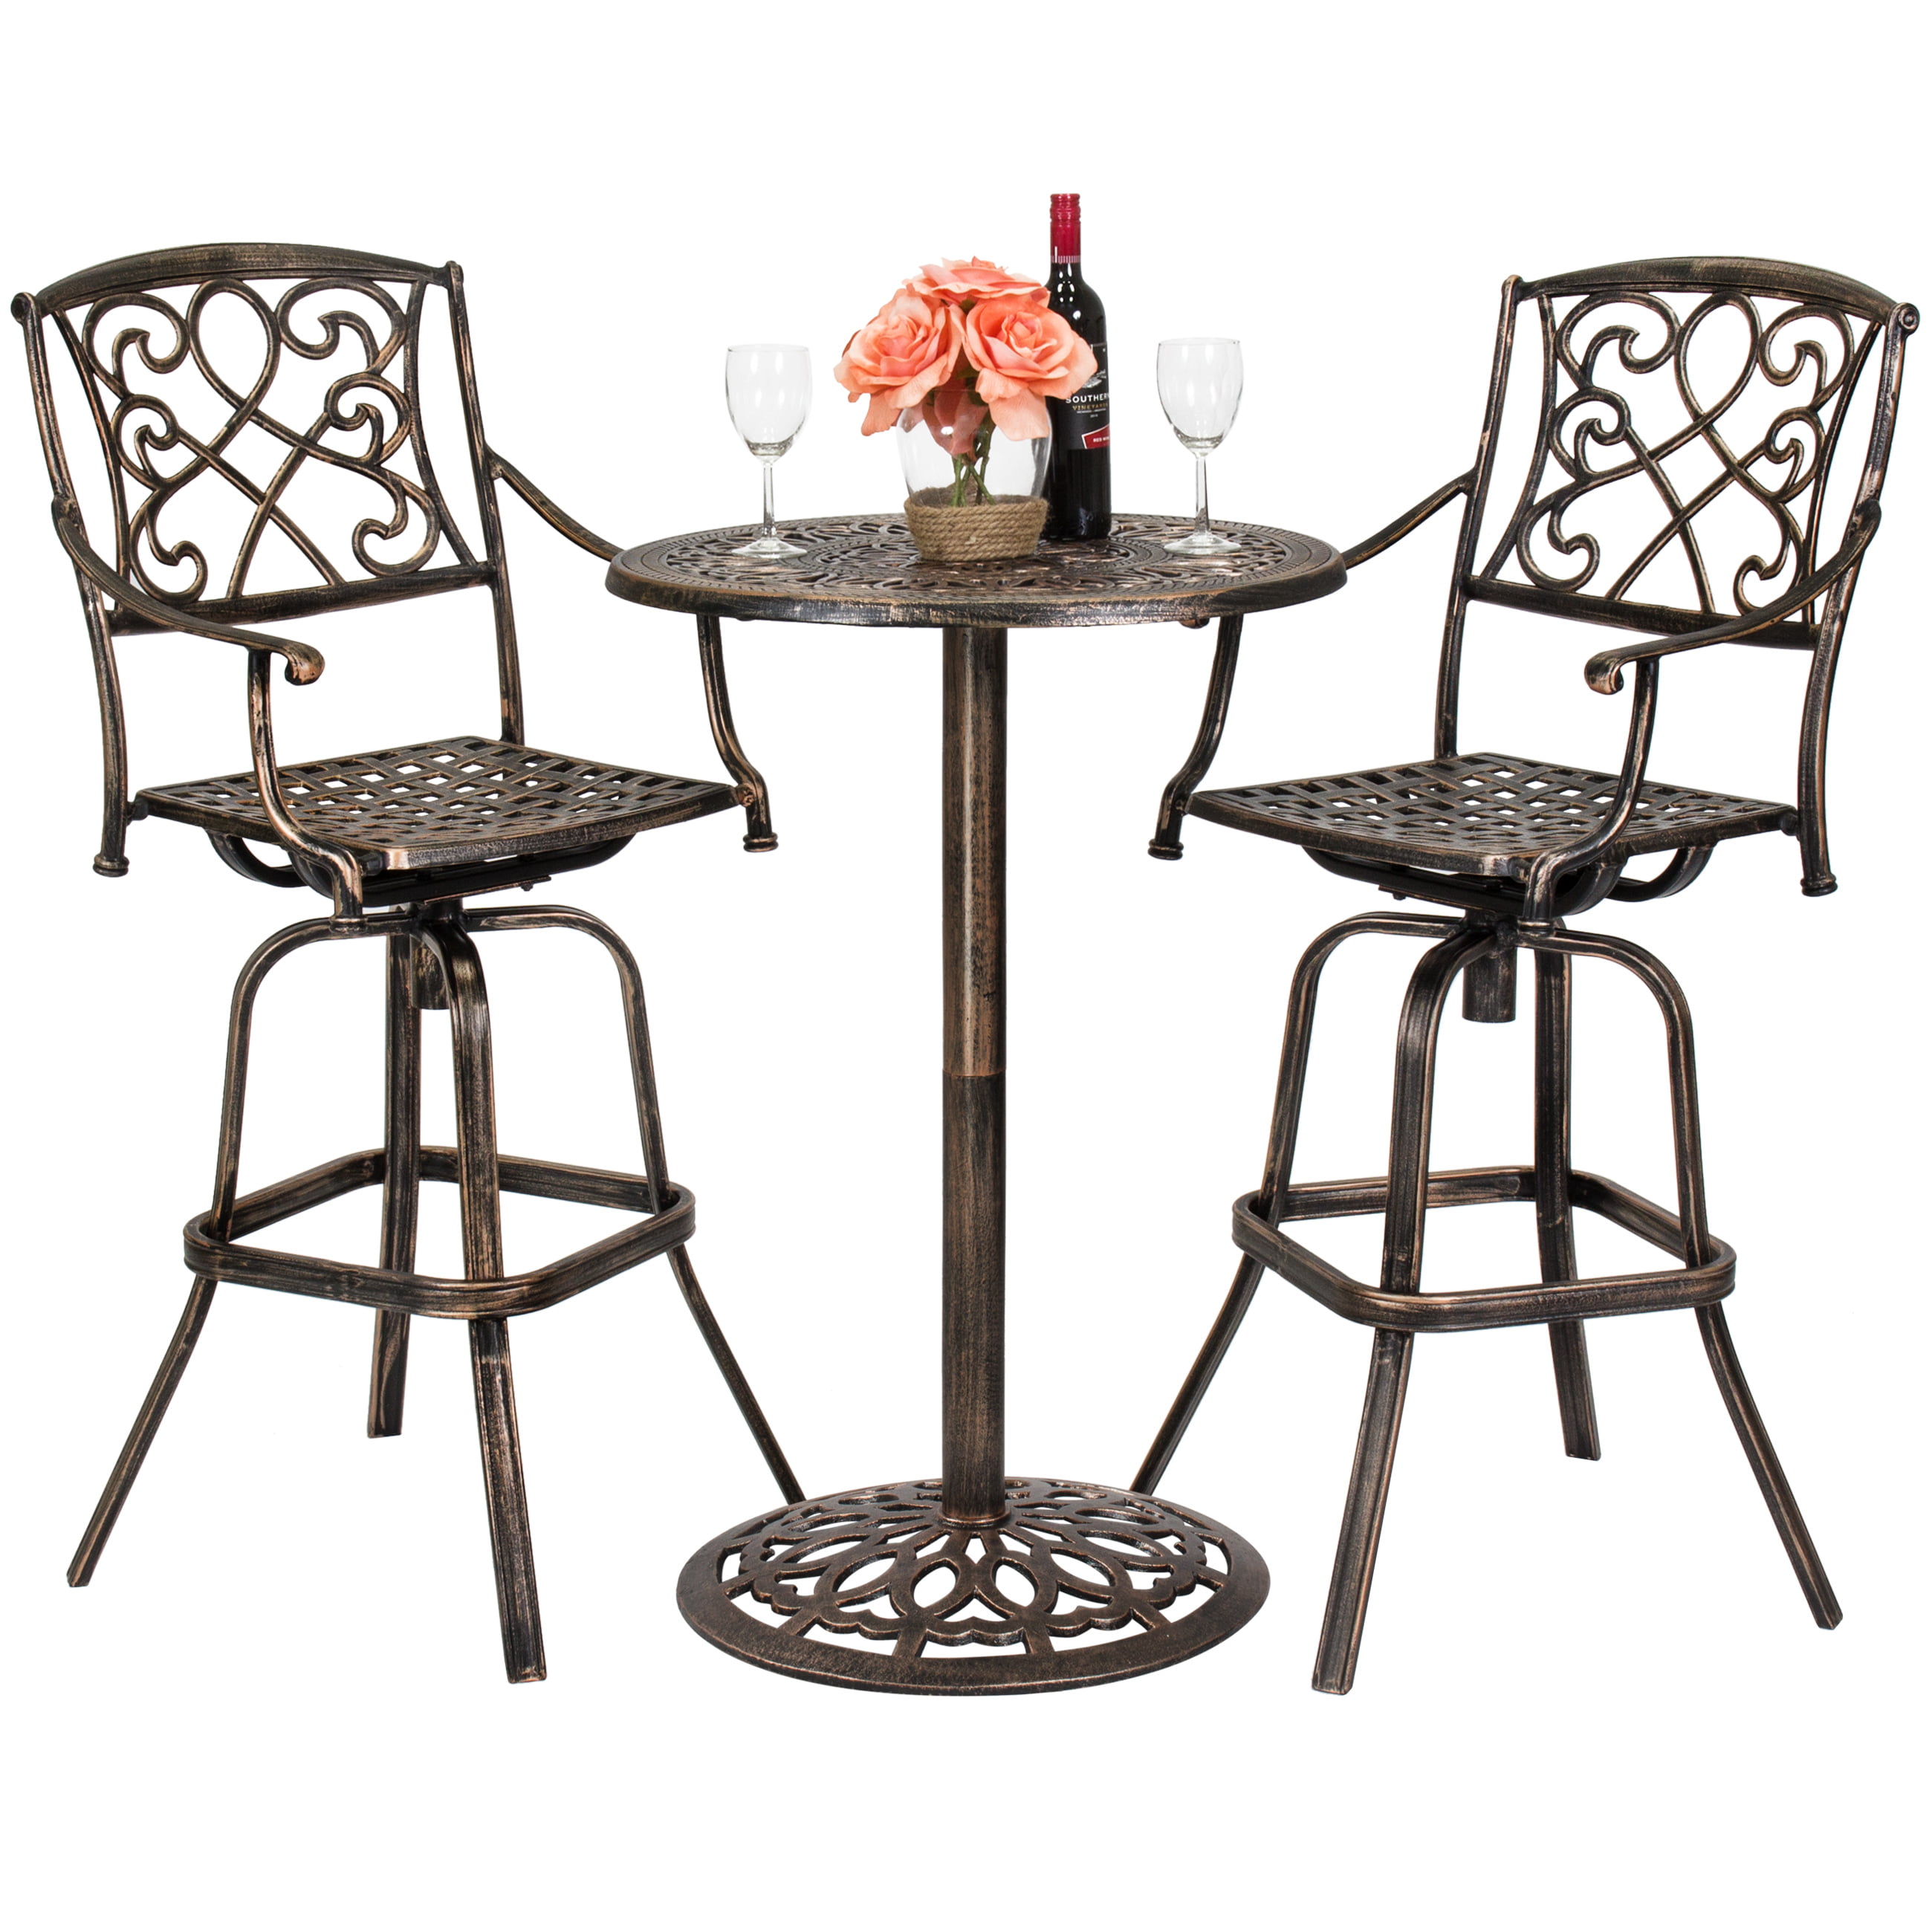 Best Choice Products 3-Piece Outdoor Cast Aluminum Bistro Set for Patio